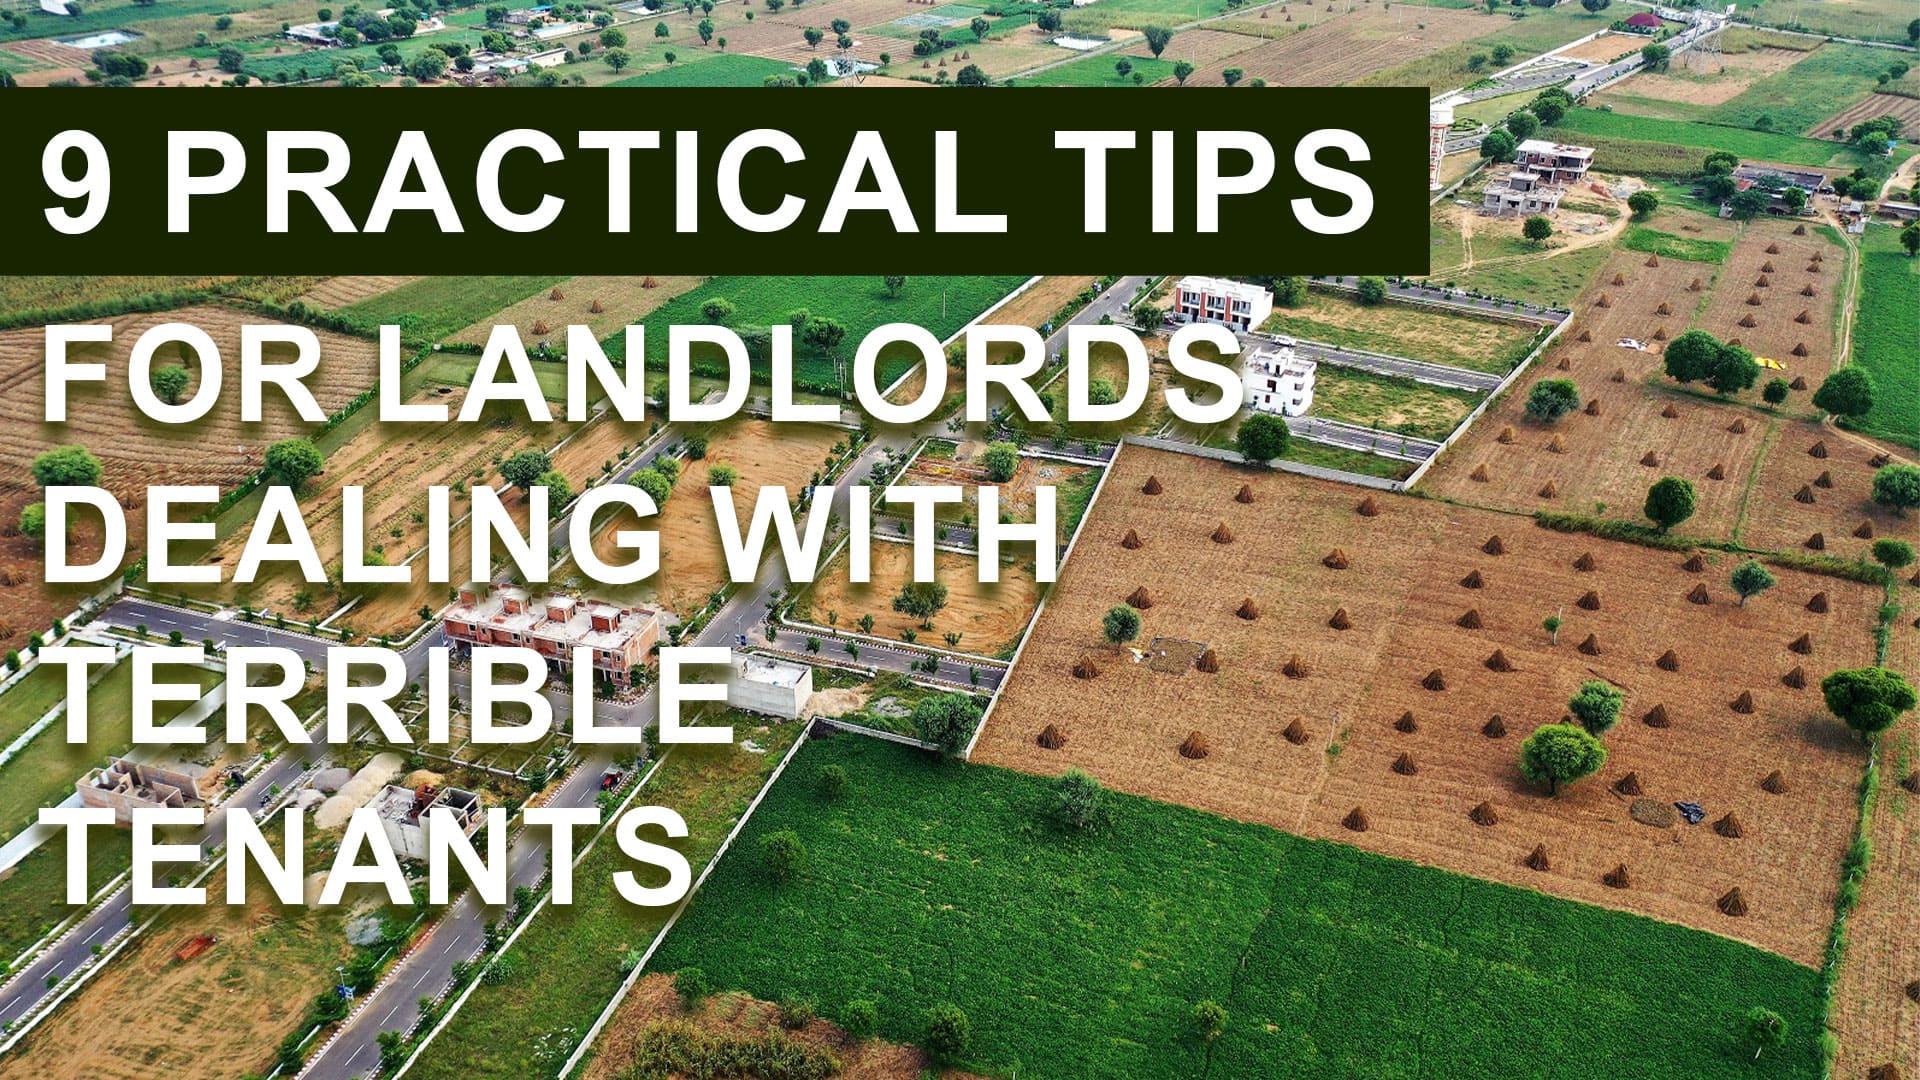 Tips for Landlords Dealing with Terrible Tenants